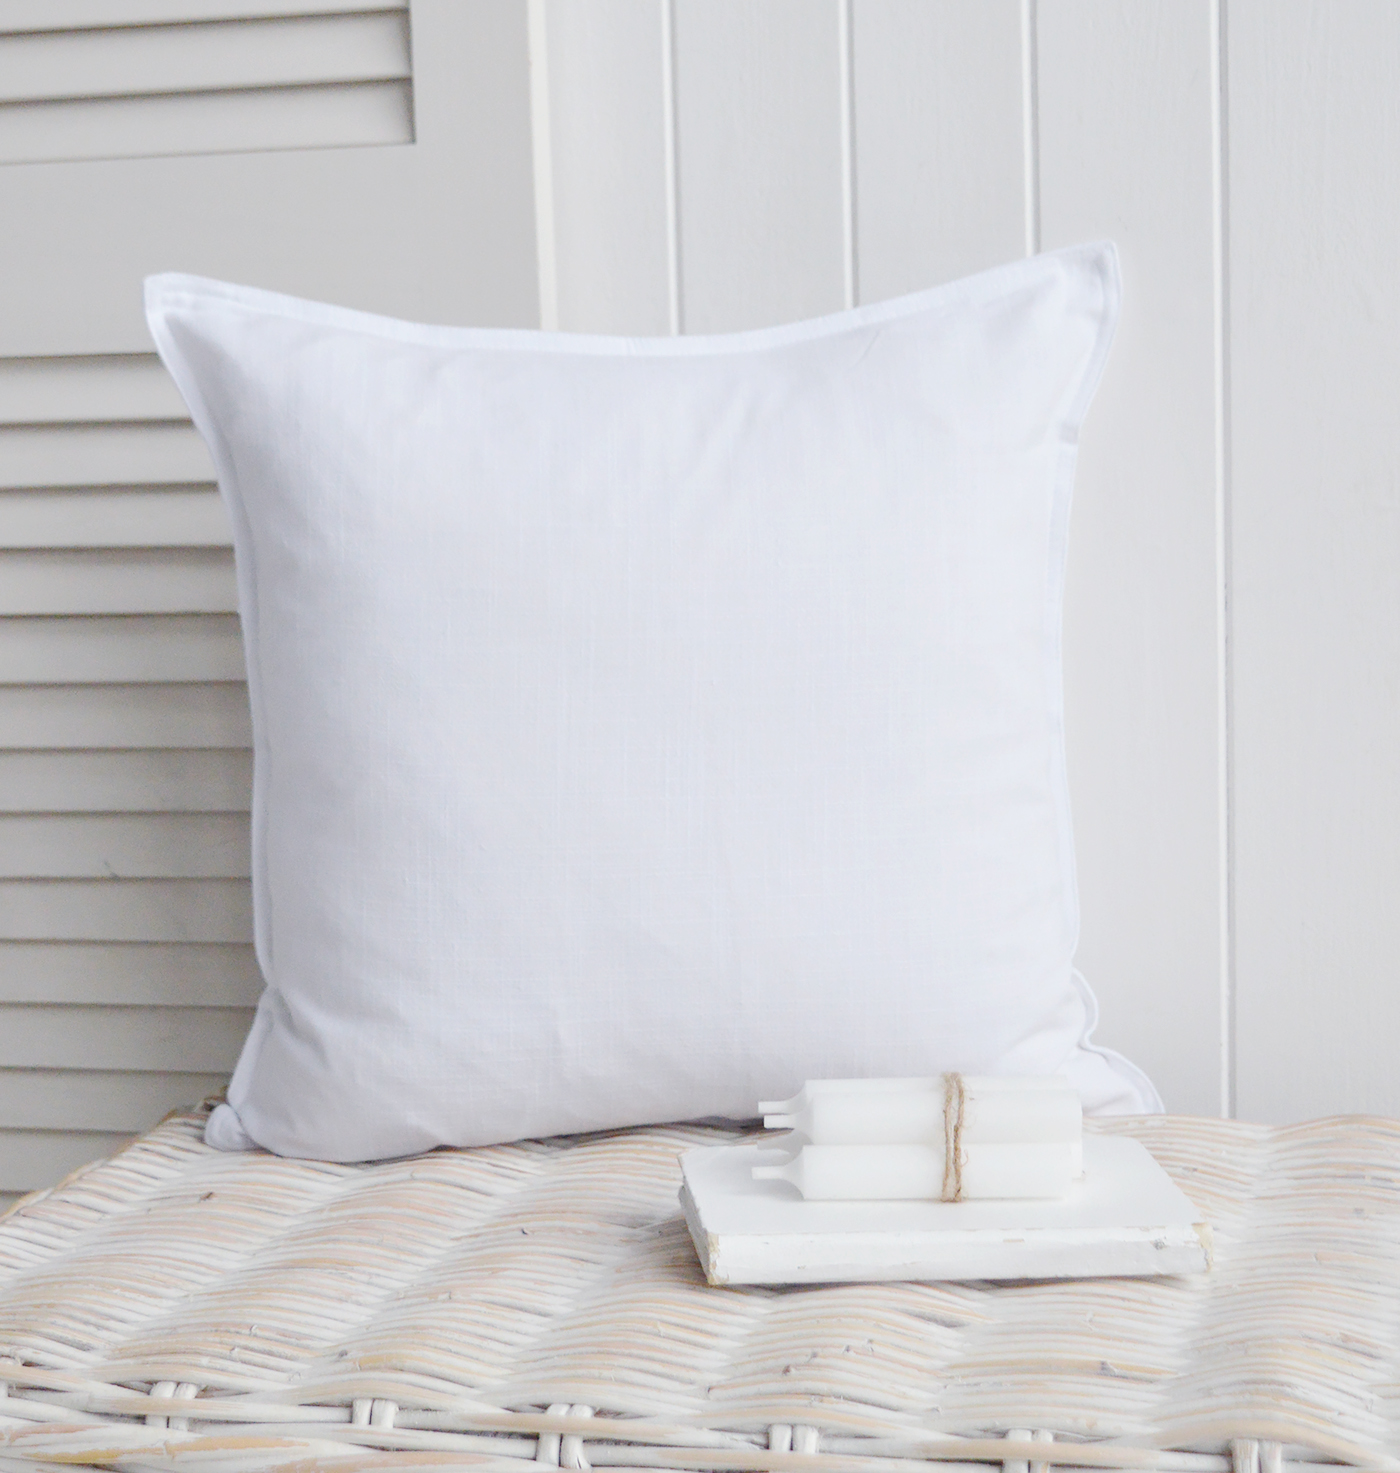 Hamilton white linen cushion cover to complement our range of coastal cushions